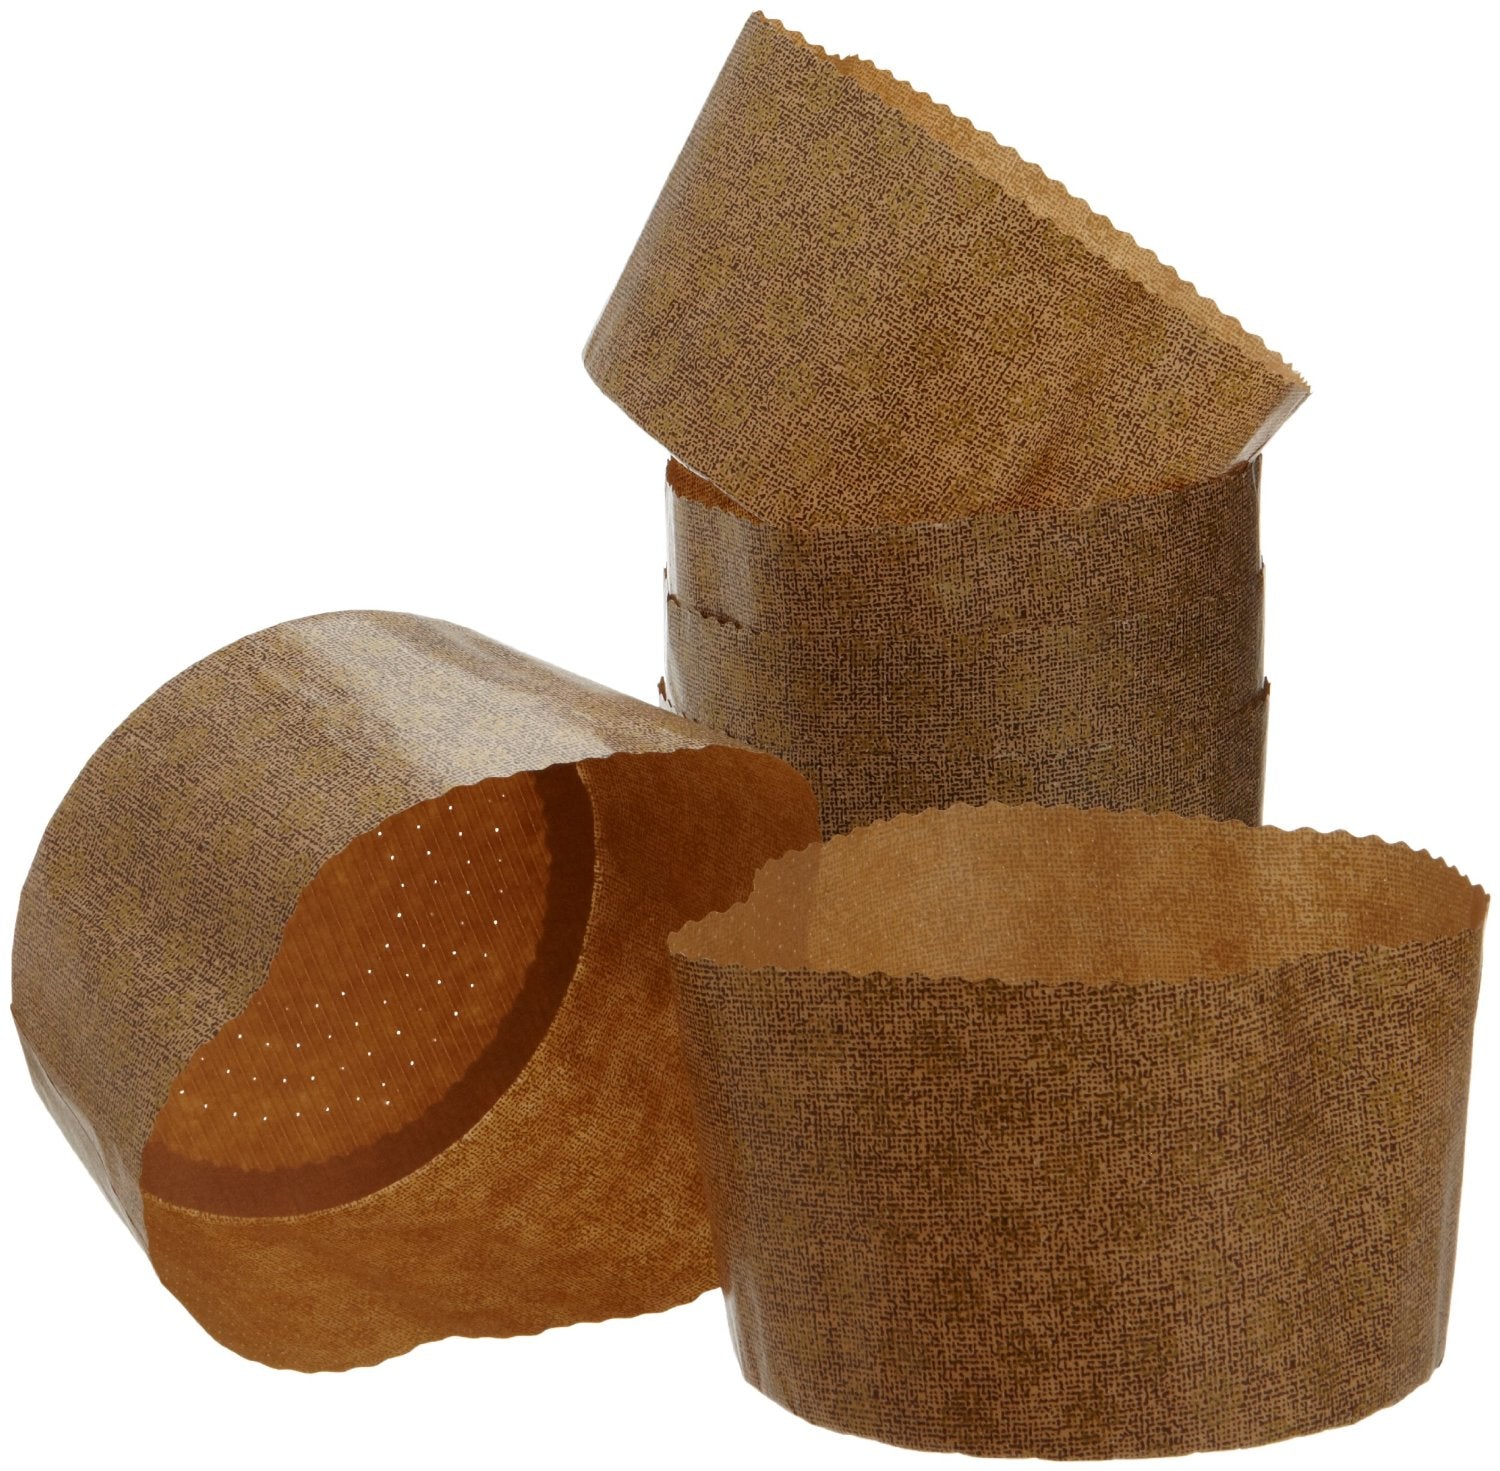 Kitchen Supply 6-Pack Large Panettone Paper Baking Molds